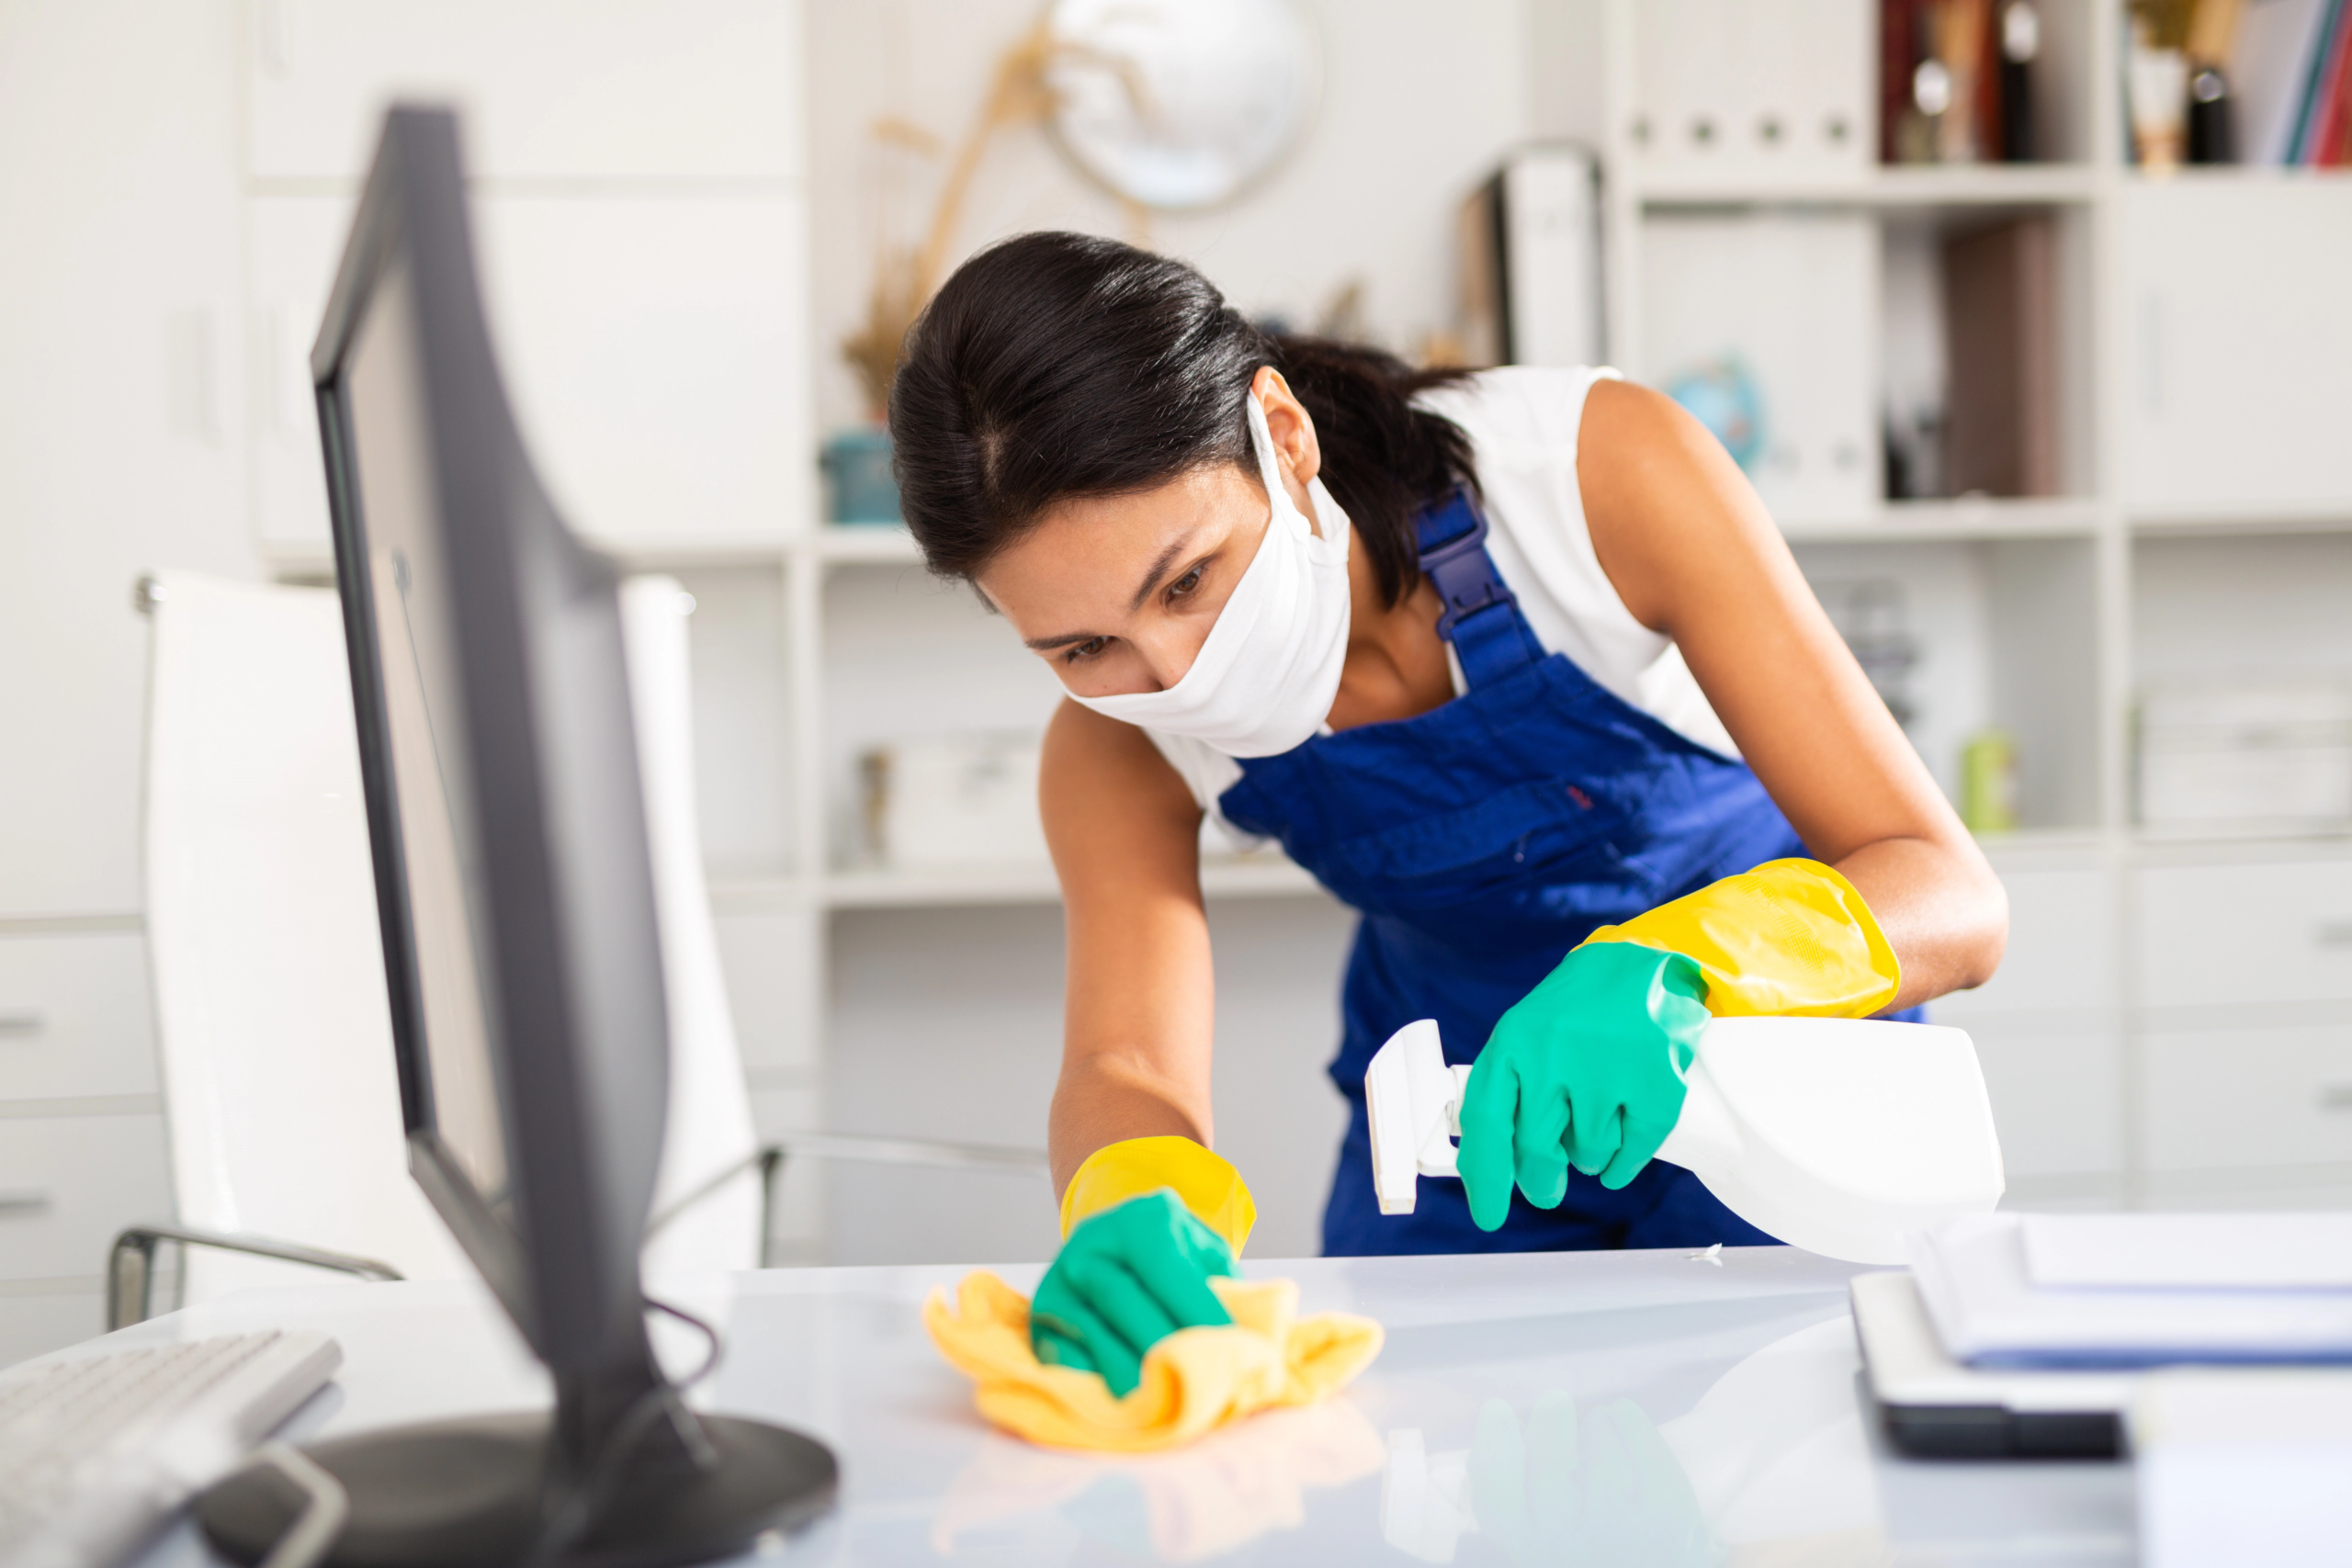 How to Prepare for House Cleaner?